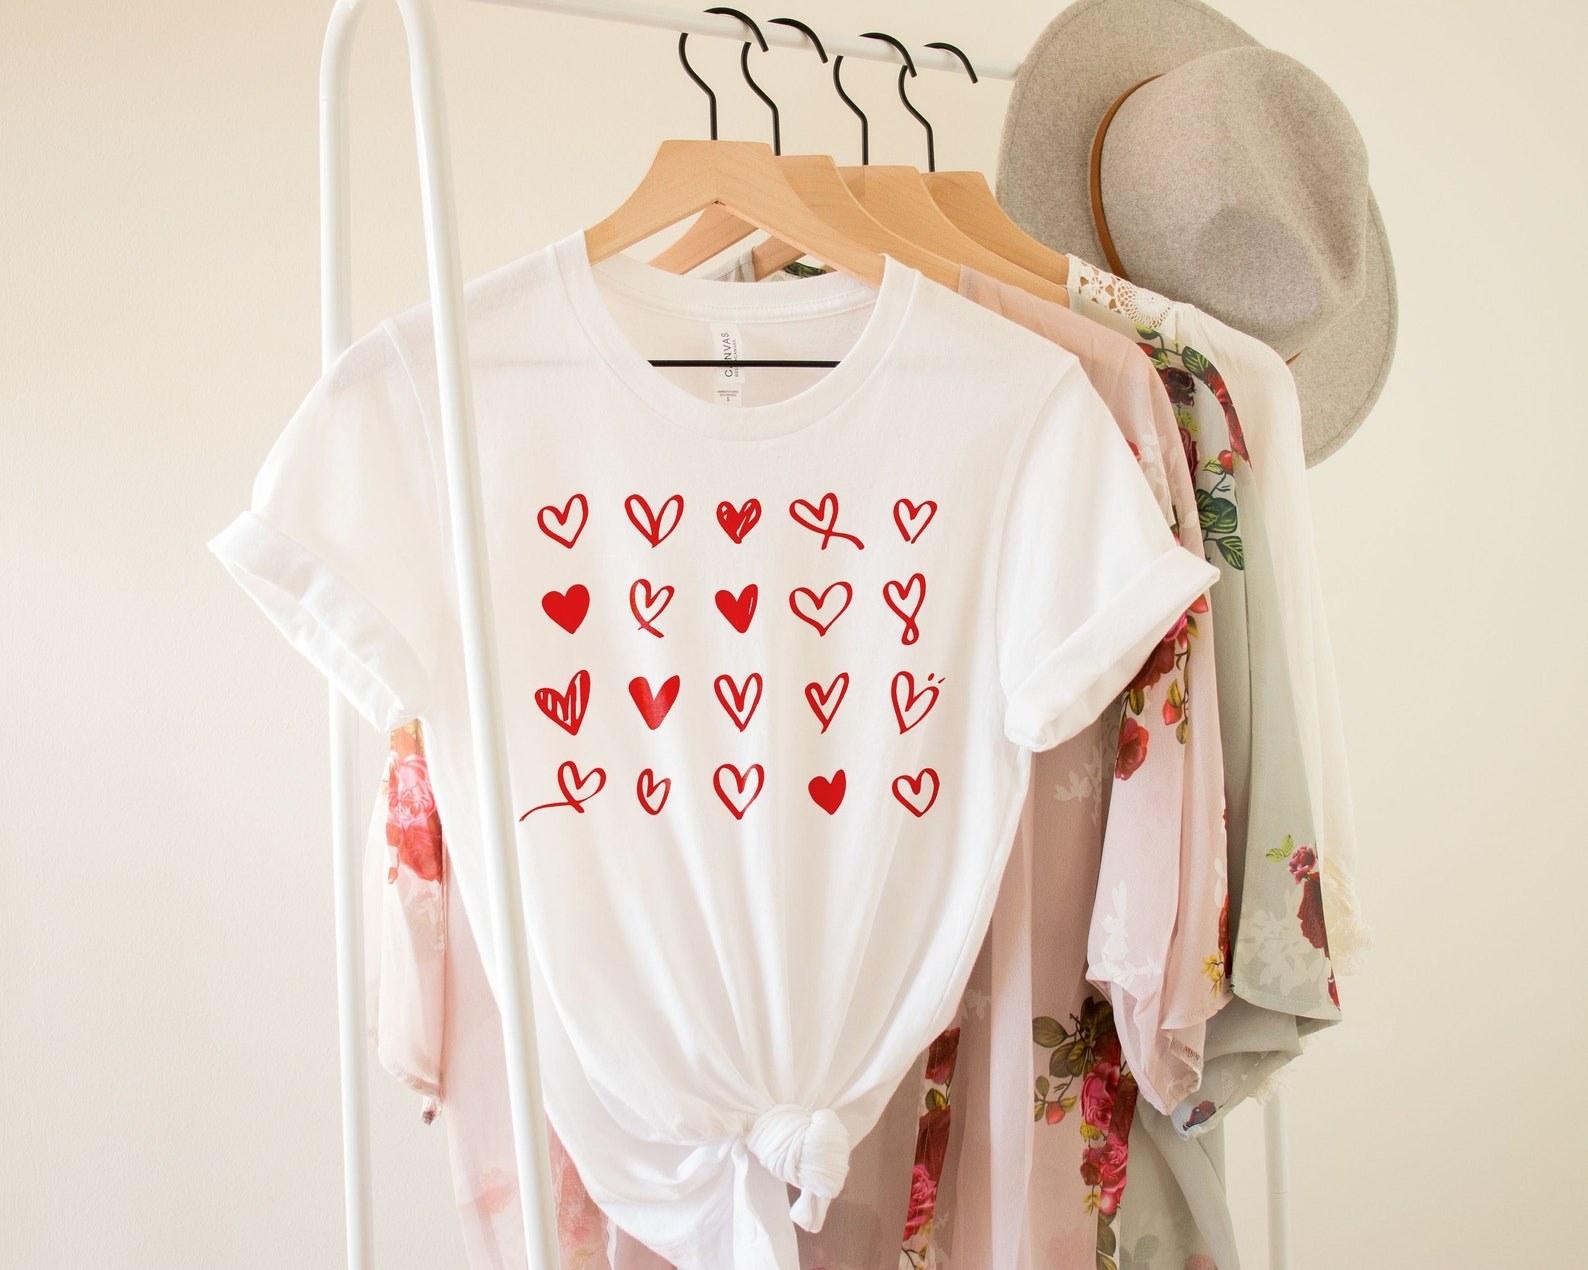 Heart-printed t-shirt hanging on a hanger